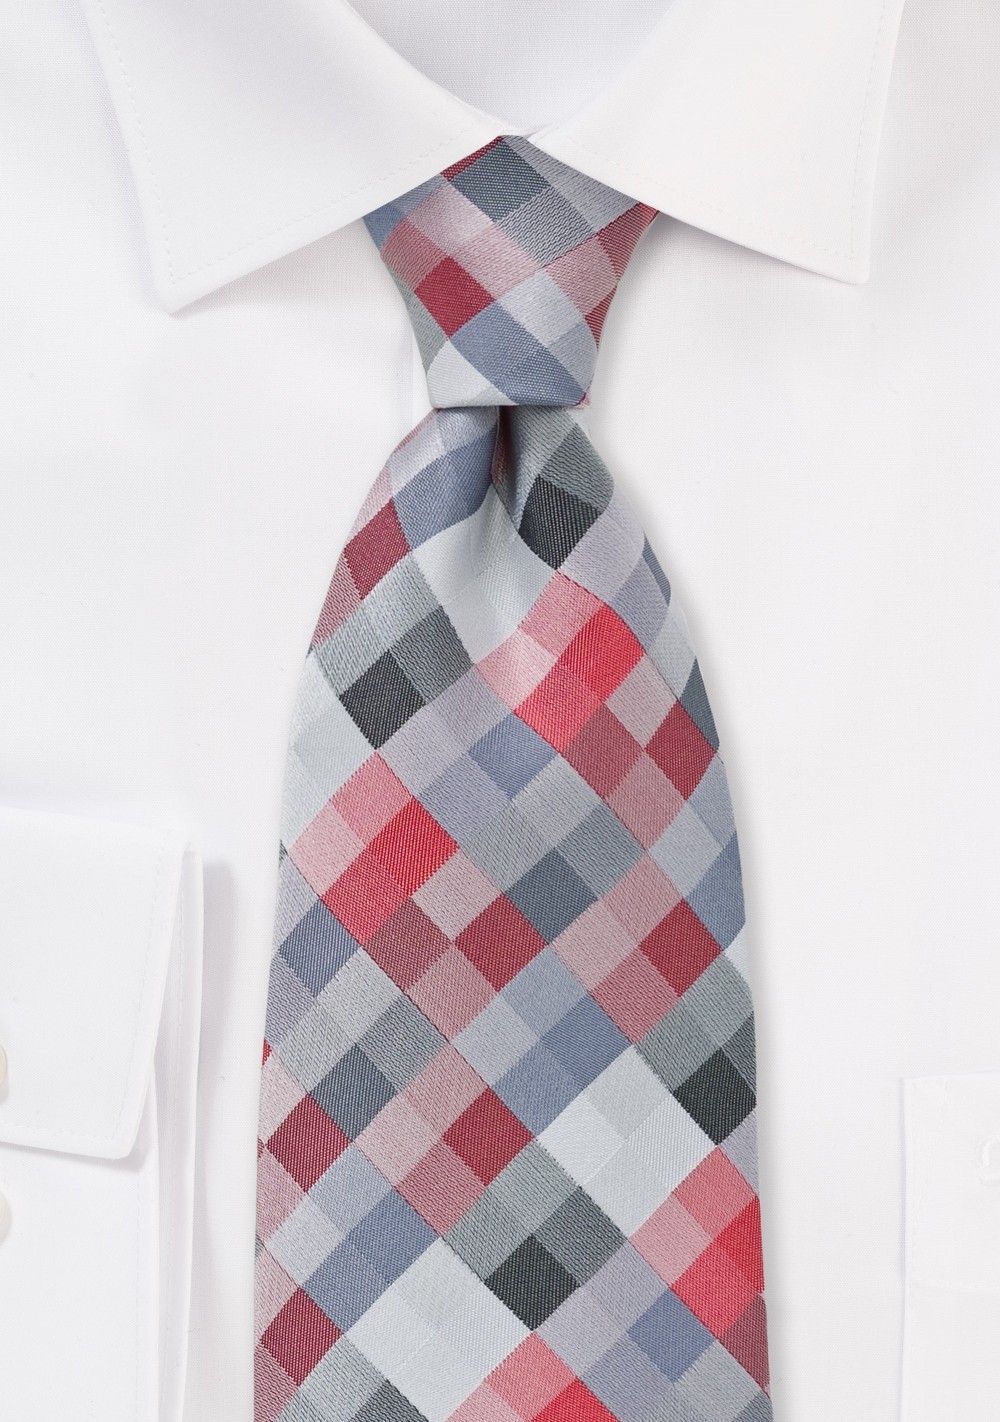 Diamond Check Kids Tie in Red and Silver